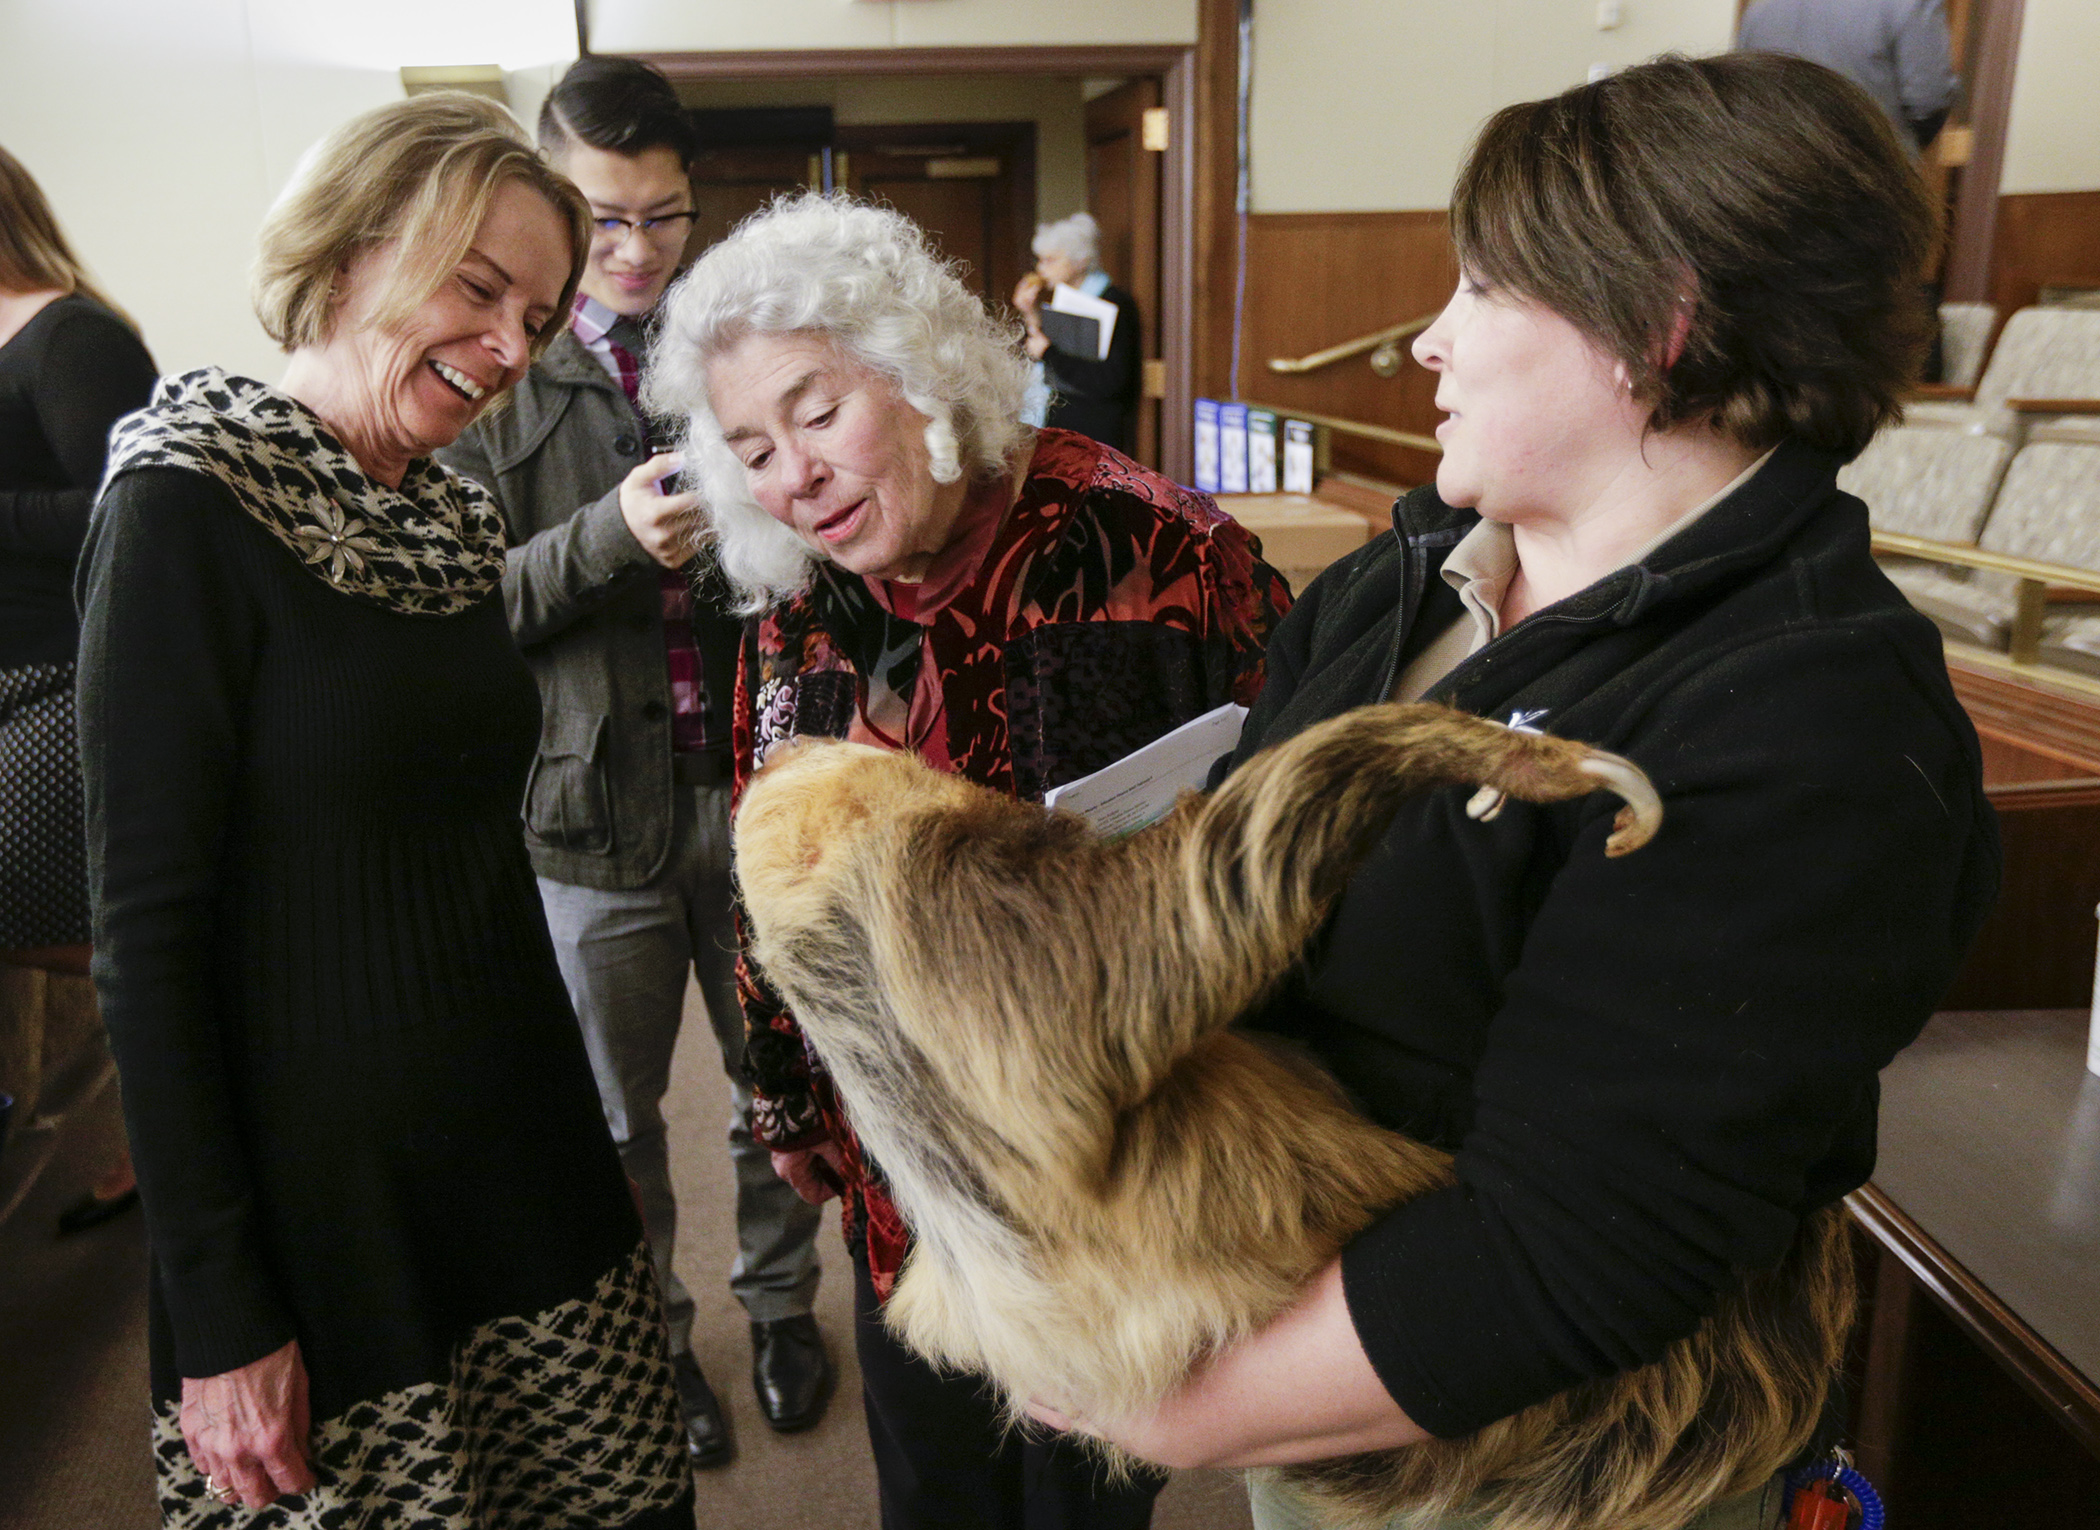 Rep. Sandy Layman, left, and Rep. Mary Murphy meet Chloe the Hoffman’s two-toed sloth from the Como Zoo, before the Feb. 13 House Legacy Funding Finance Committee meeting where zoo officials presented their Legacy Fund request. Chloe is held by Senior Zookeeper Allison Jungheim. Photo by Paul Battaglia